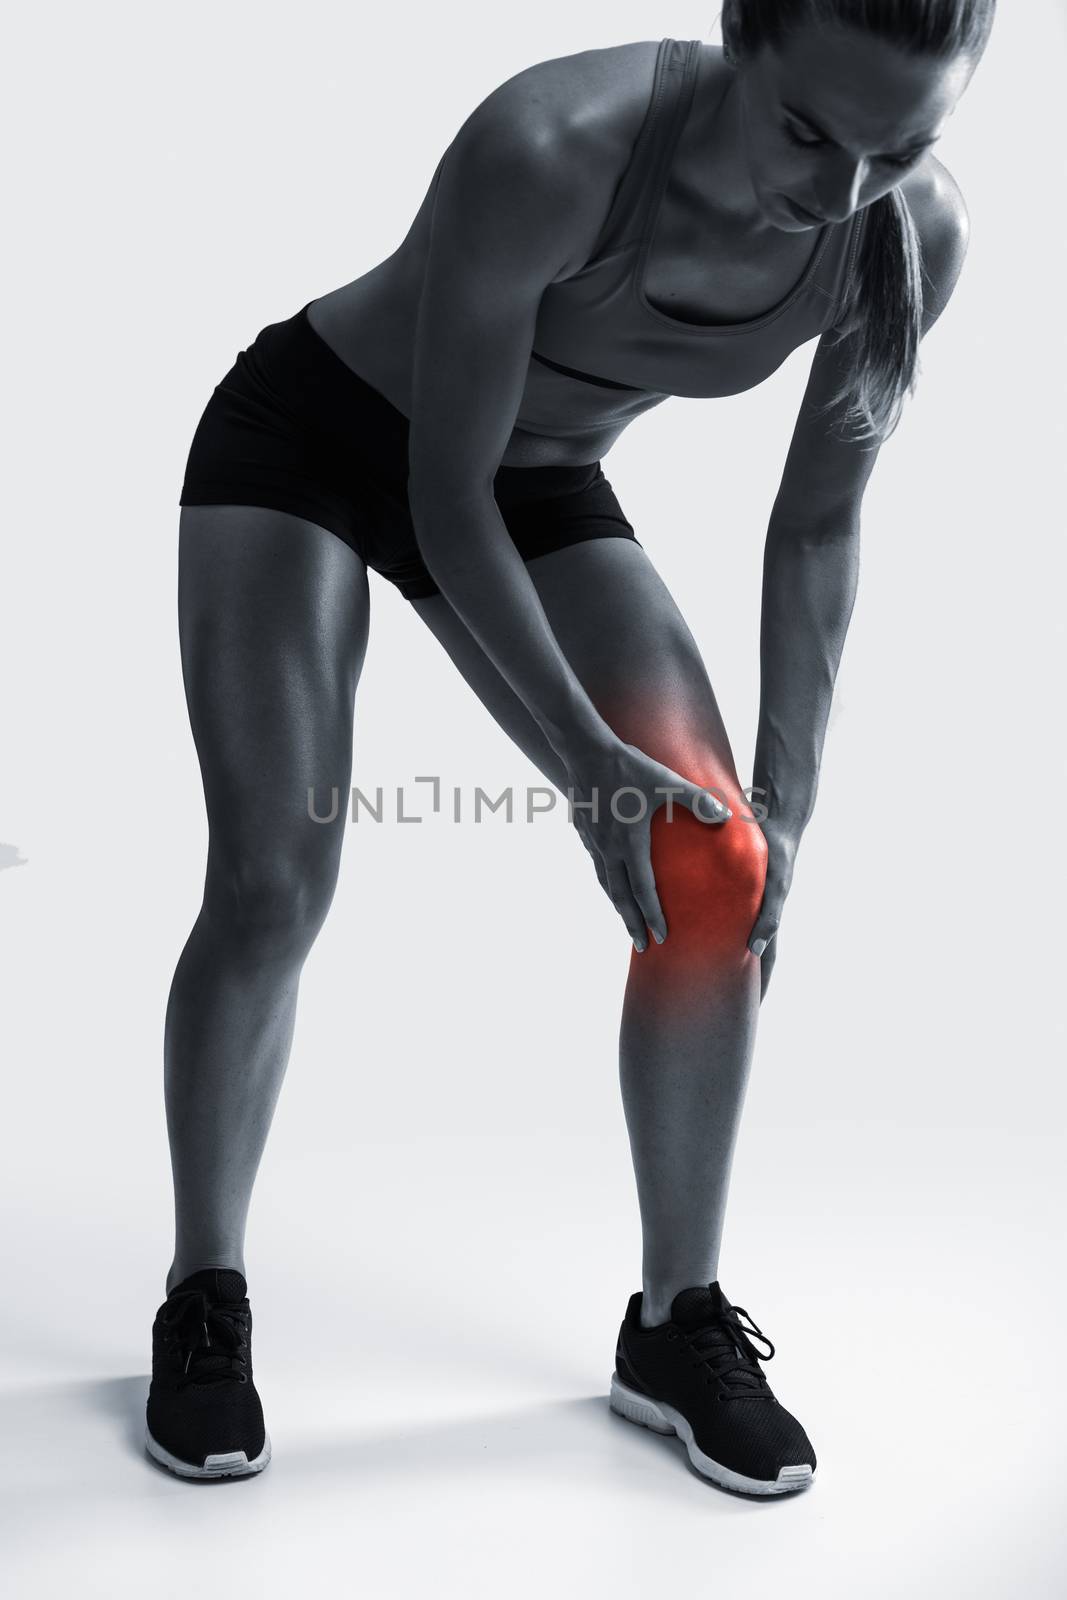 Studio shot of a sporty young woman holding her knee in pain